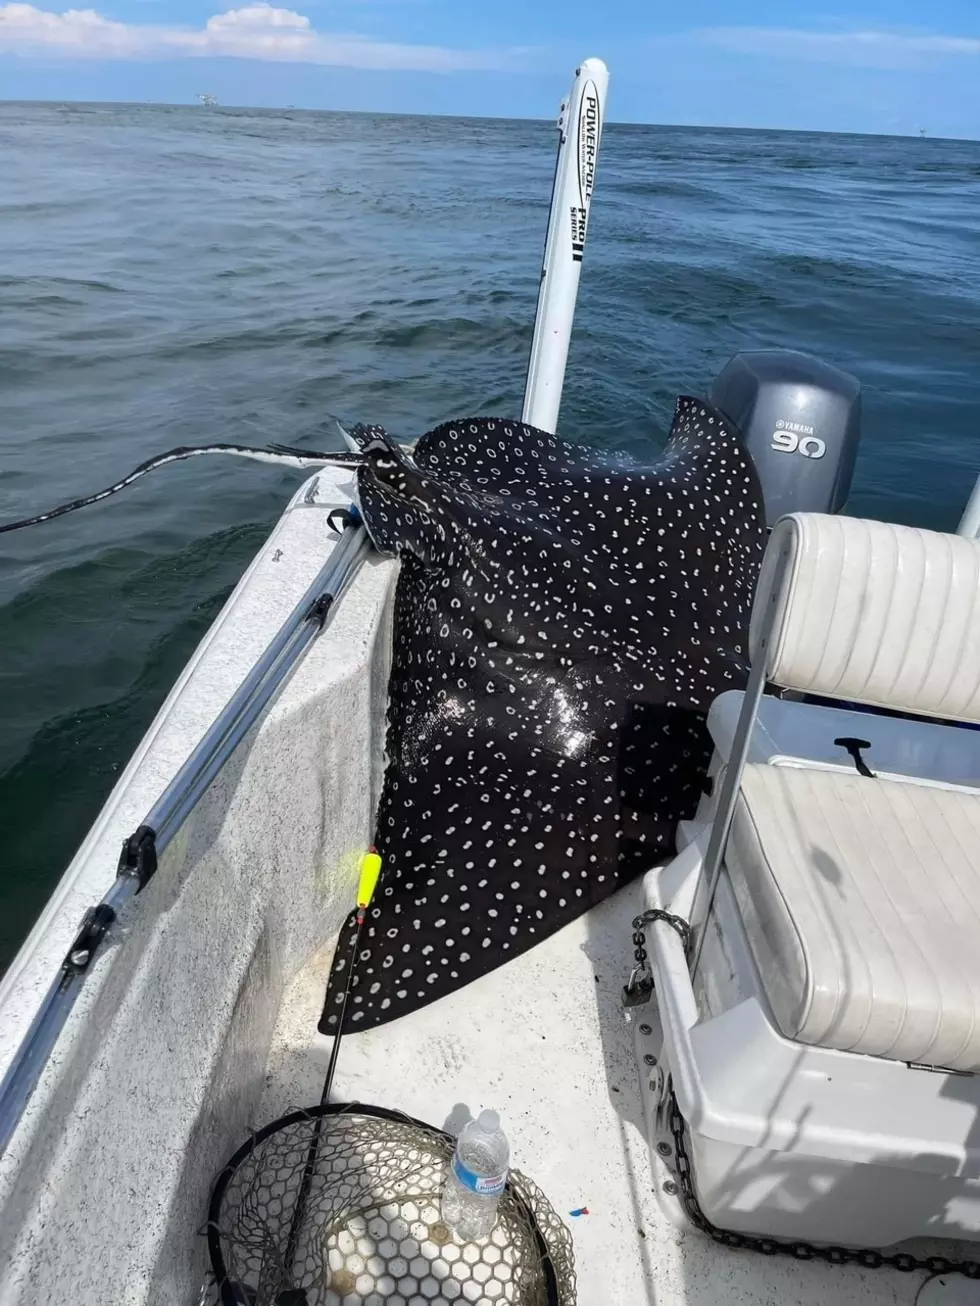 400 Pound Sting Ray Jumps in Alabama Woman&#8217;s Boat, Sends Her to ER